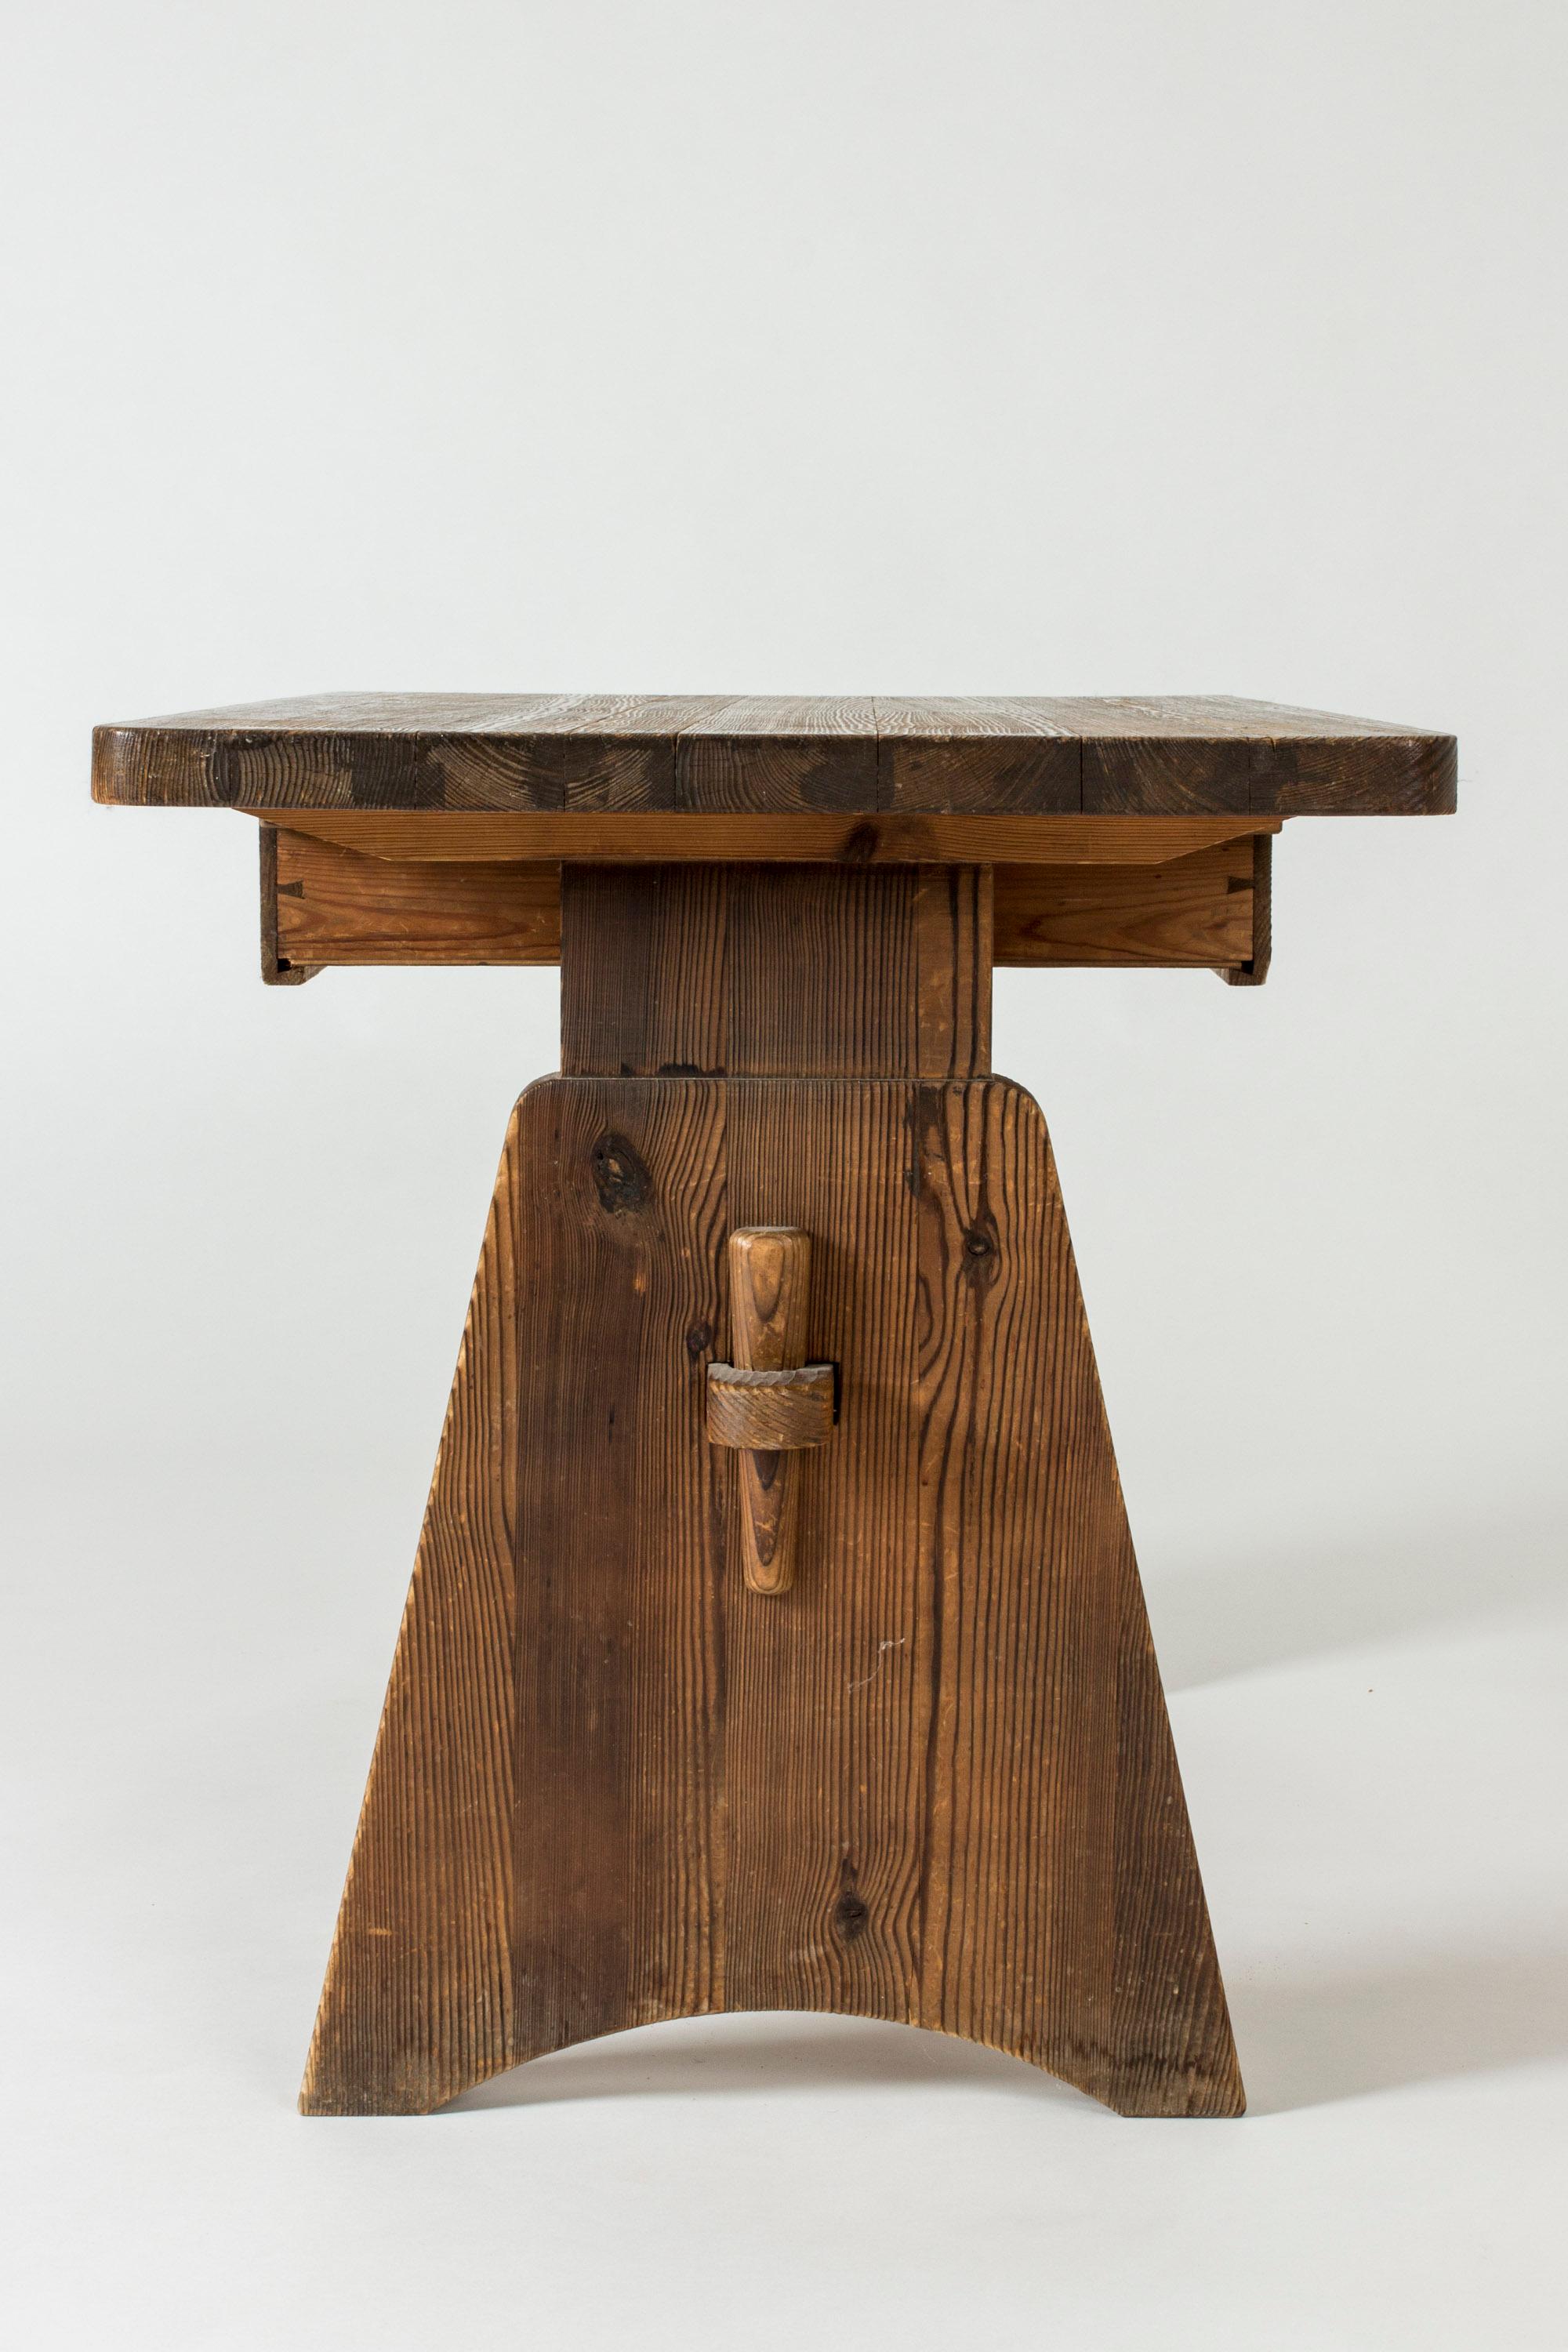 Stained Pine Console in the Style of Axel Einar Hjorth, Sweden, 1930s